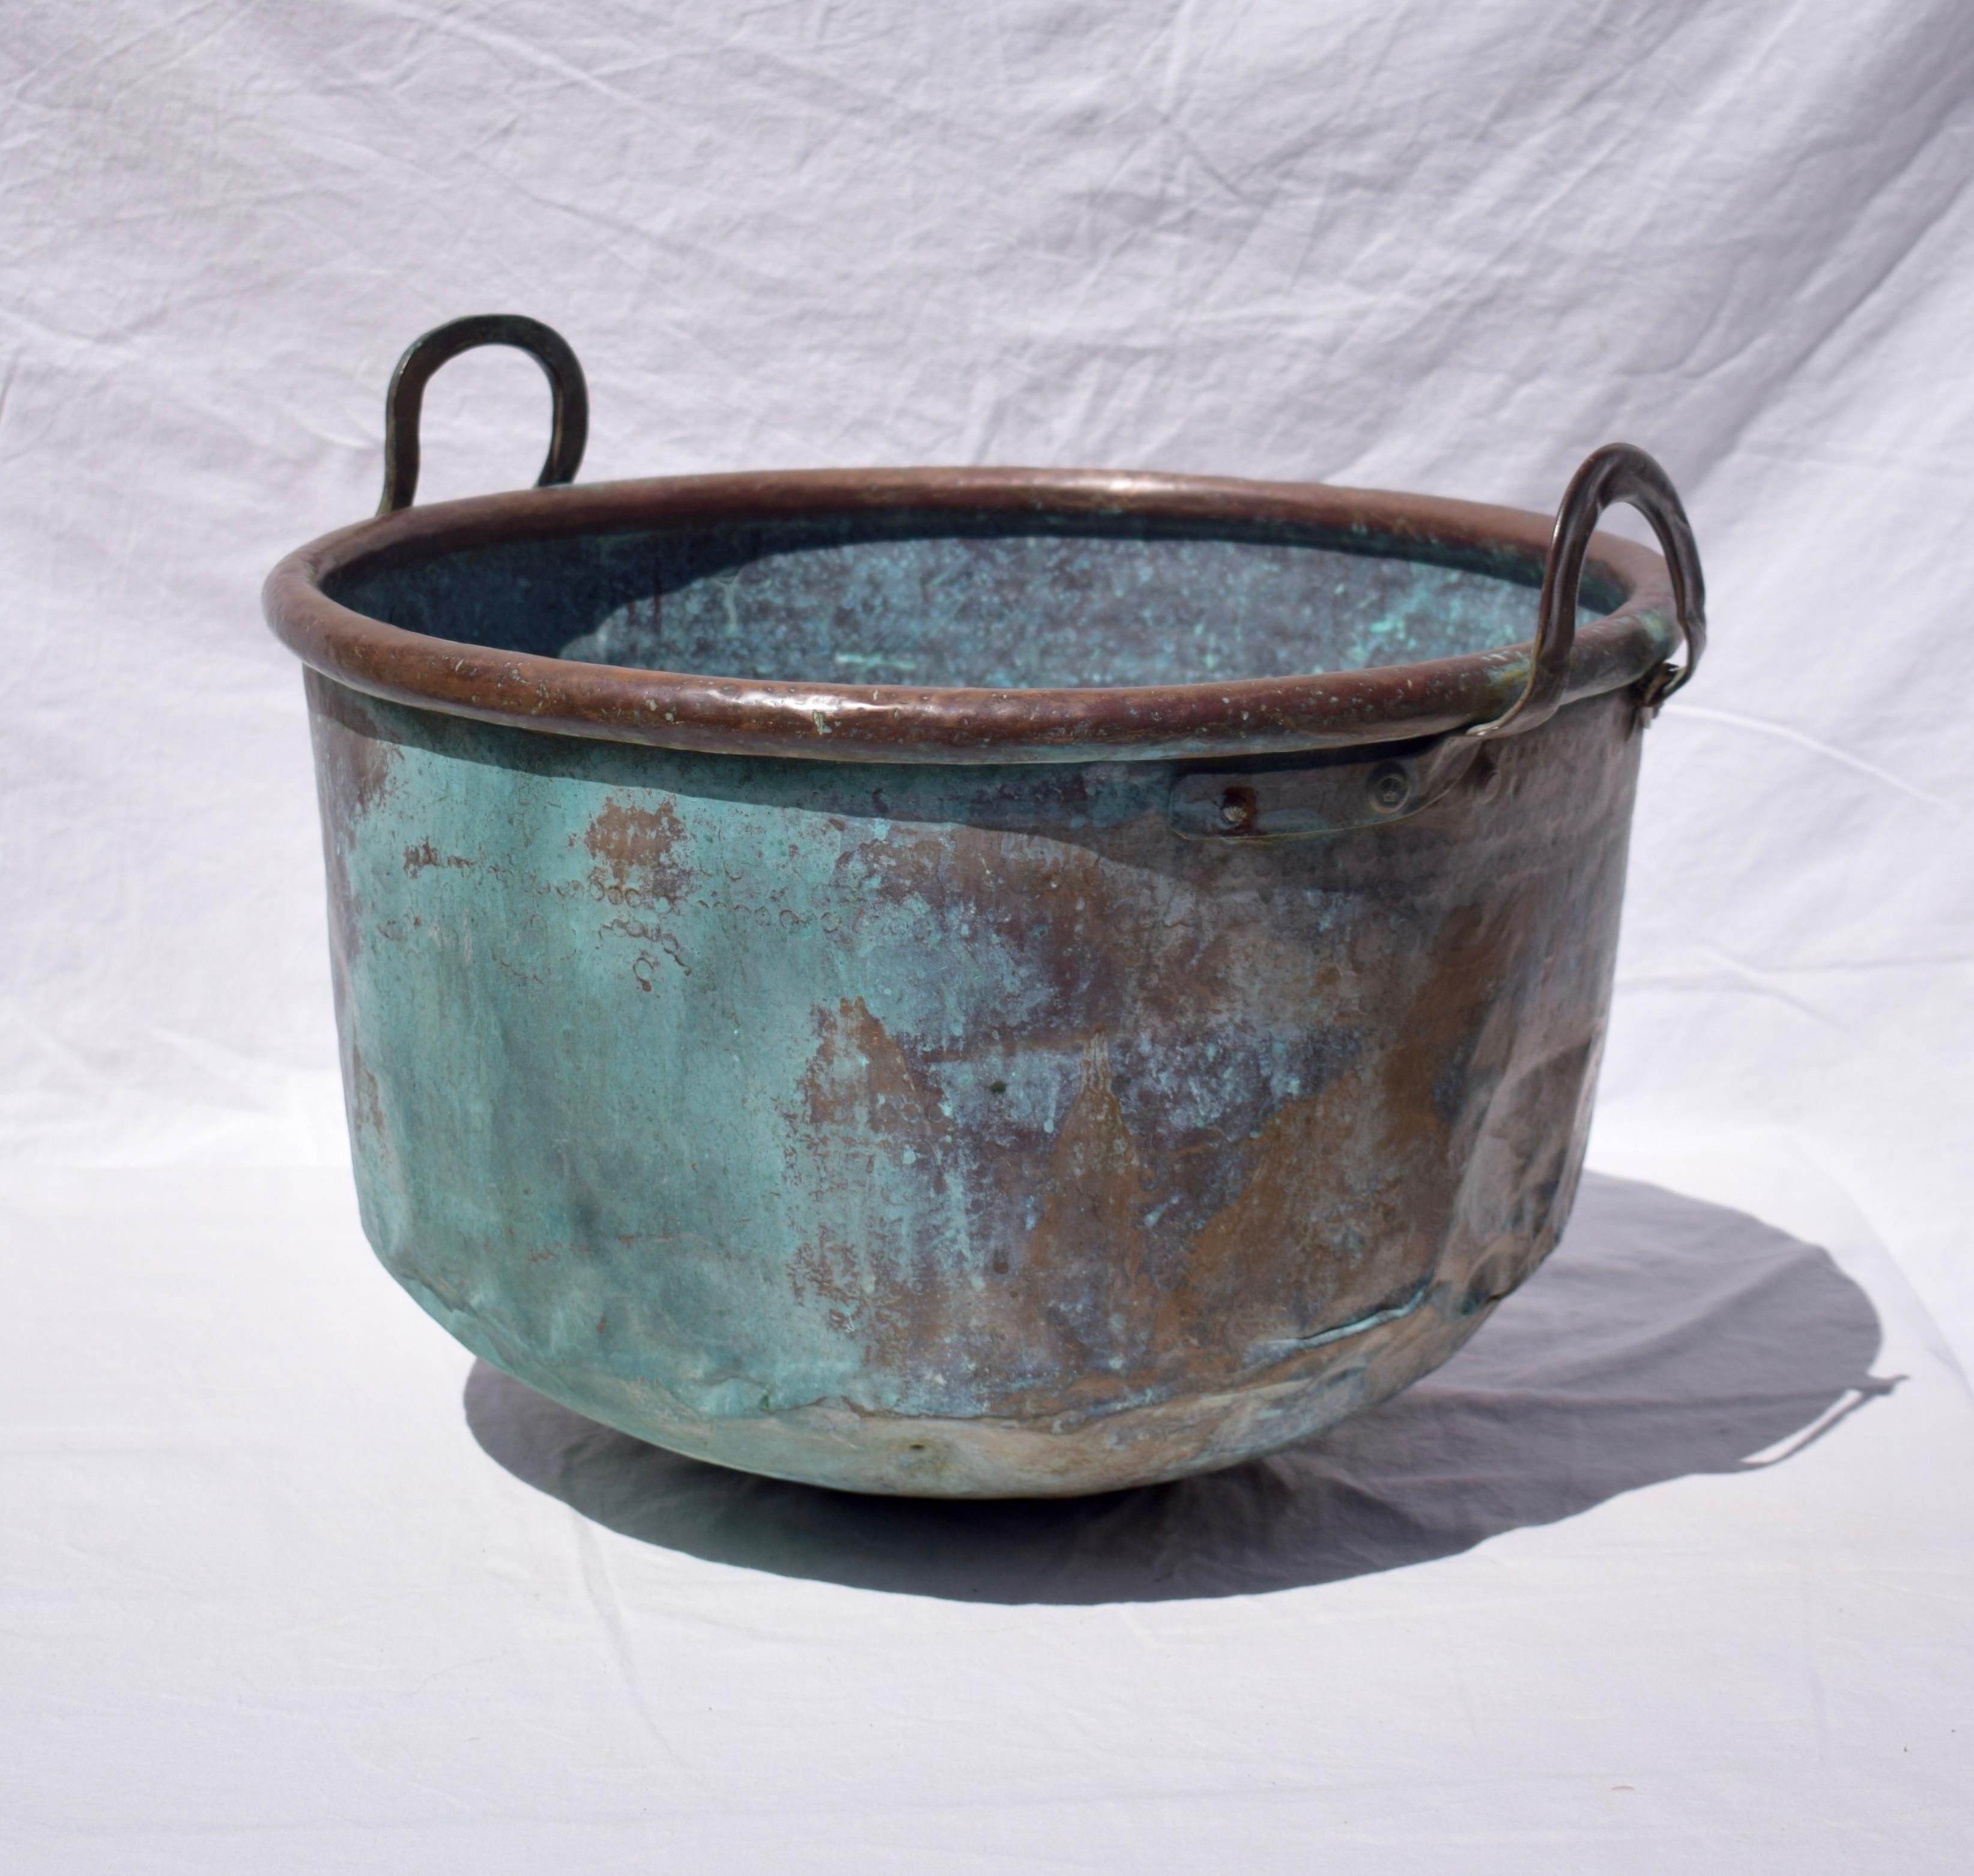 This large French farmhouse copper cauldron was probably made around 1850 and is from the Second Empire Period. The copper has a rich Verdigris patina colouration that enhances the object aesthetically. It is unique and unusual. The cauldron would